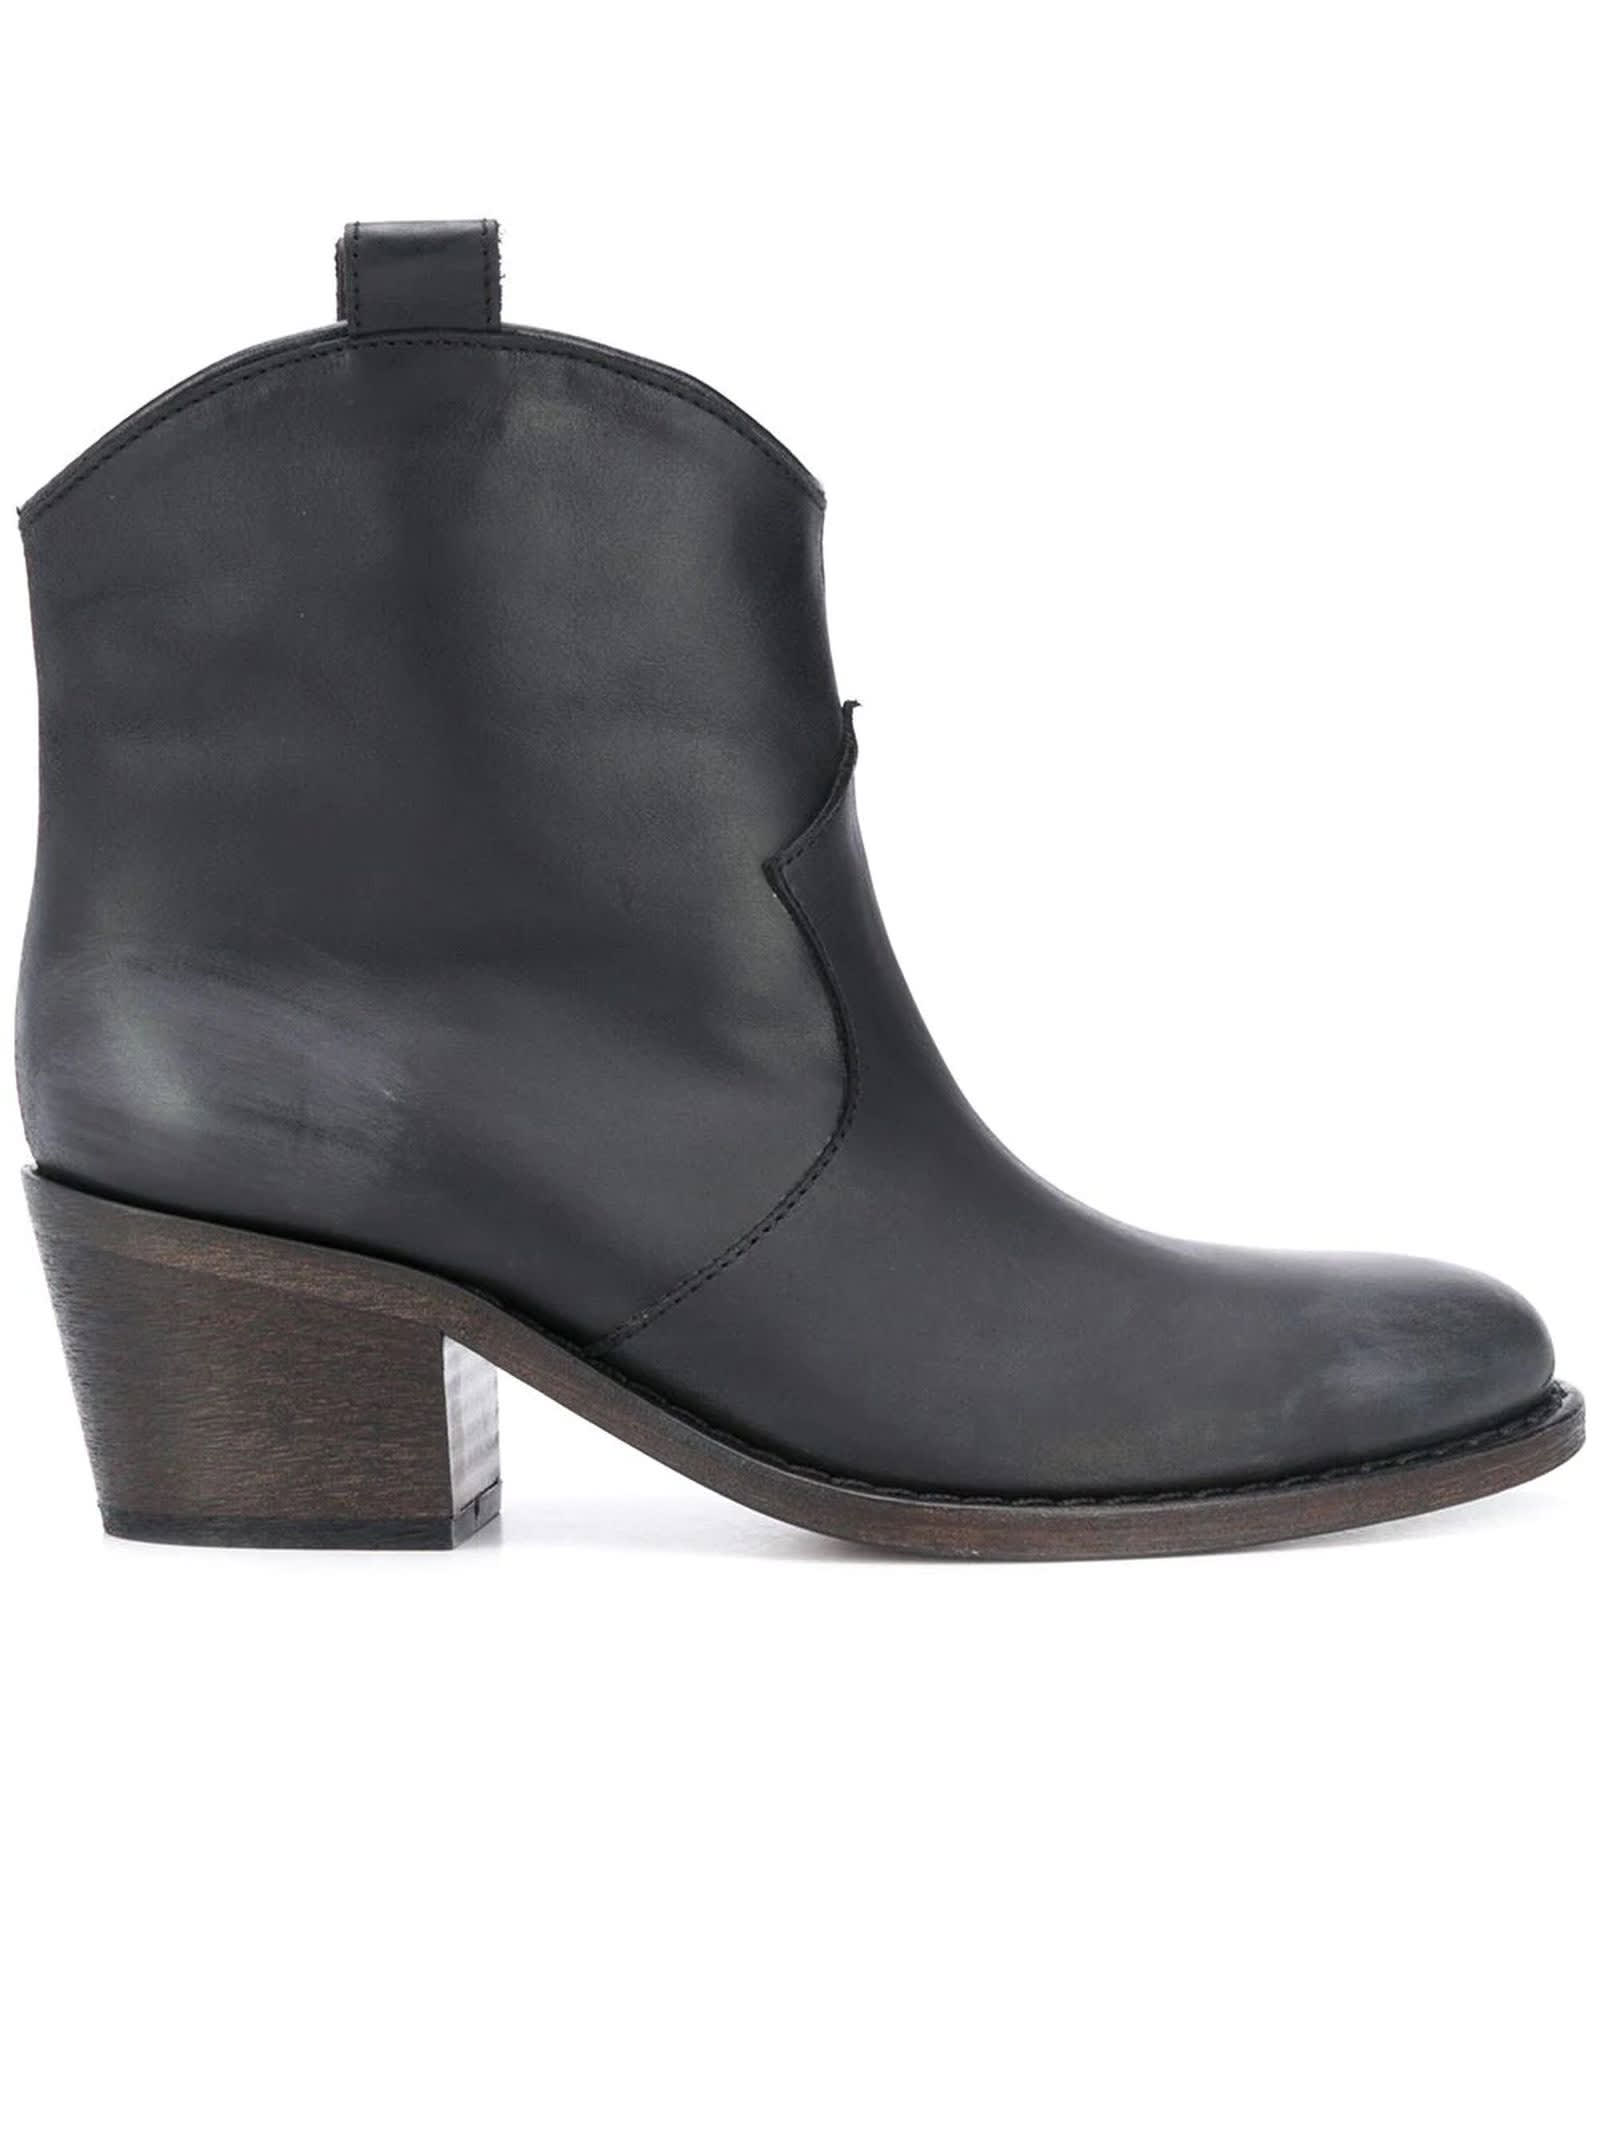 VIA ROMA 15 BLACK LEATHER ANKLE BOOTS